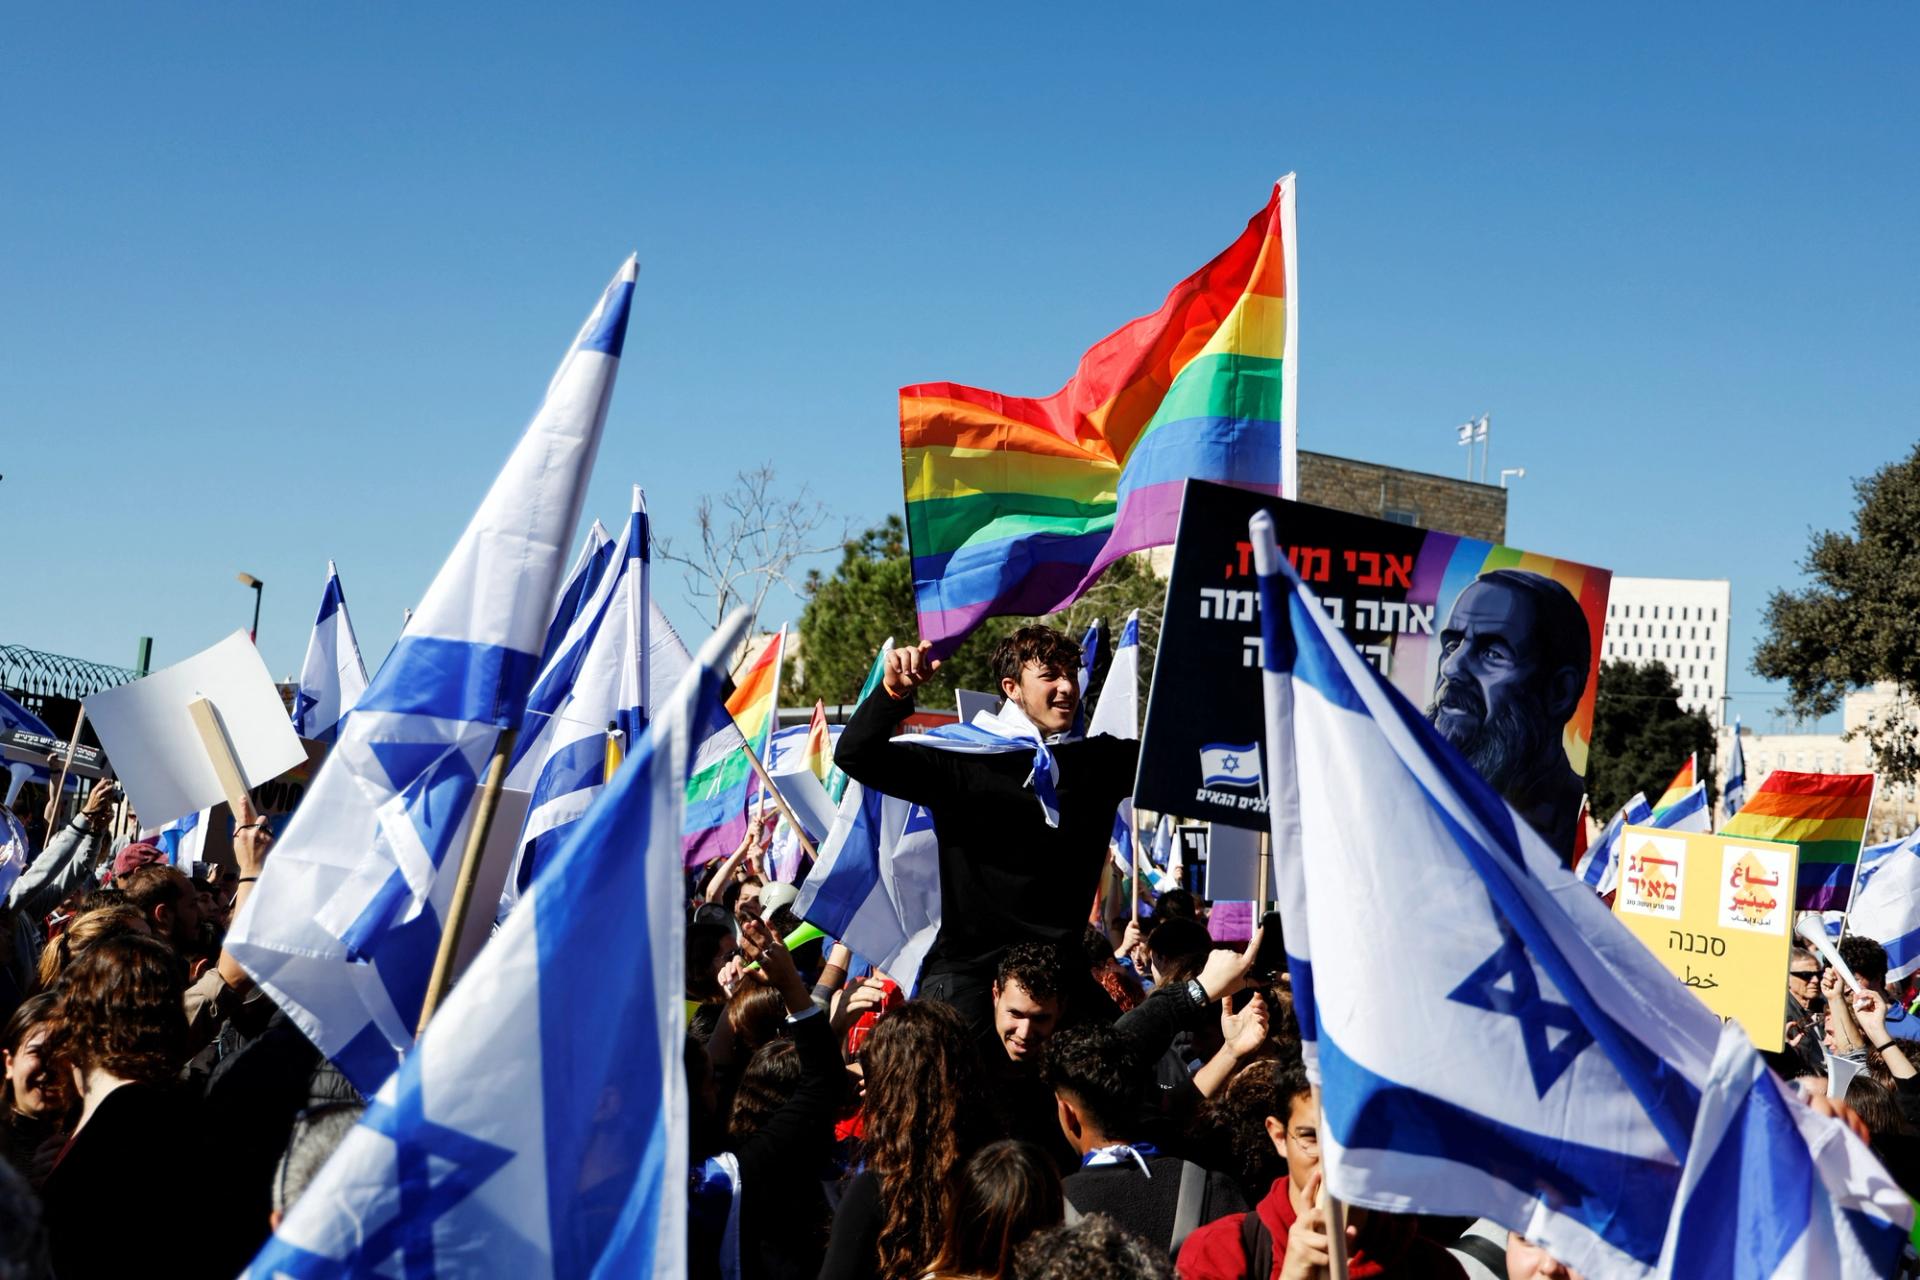 Israelis hold flags and shout slogans at a protest outside the Knesset in Jerusalem